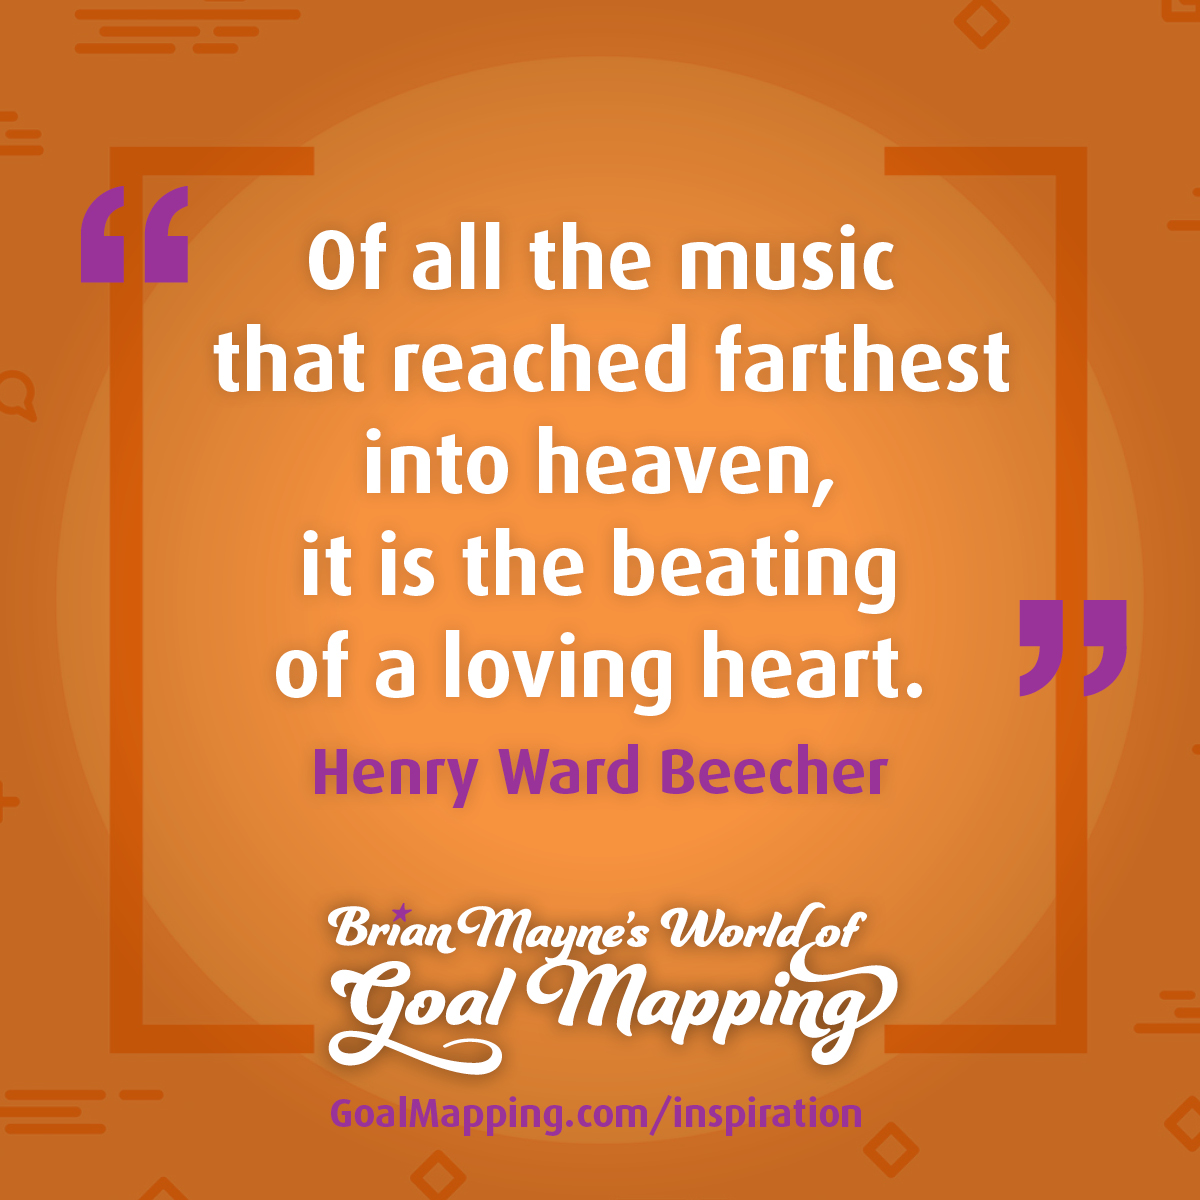 "Of all the music that reached farthest into heaven, it is the beating of a loving heart." Henry Ward Beecher